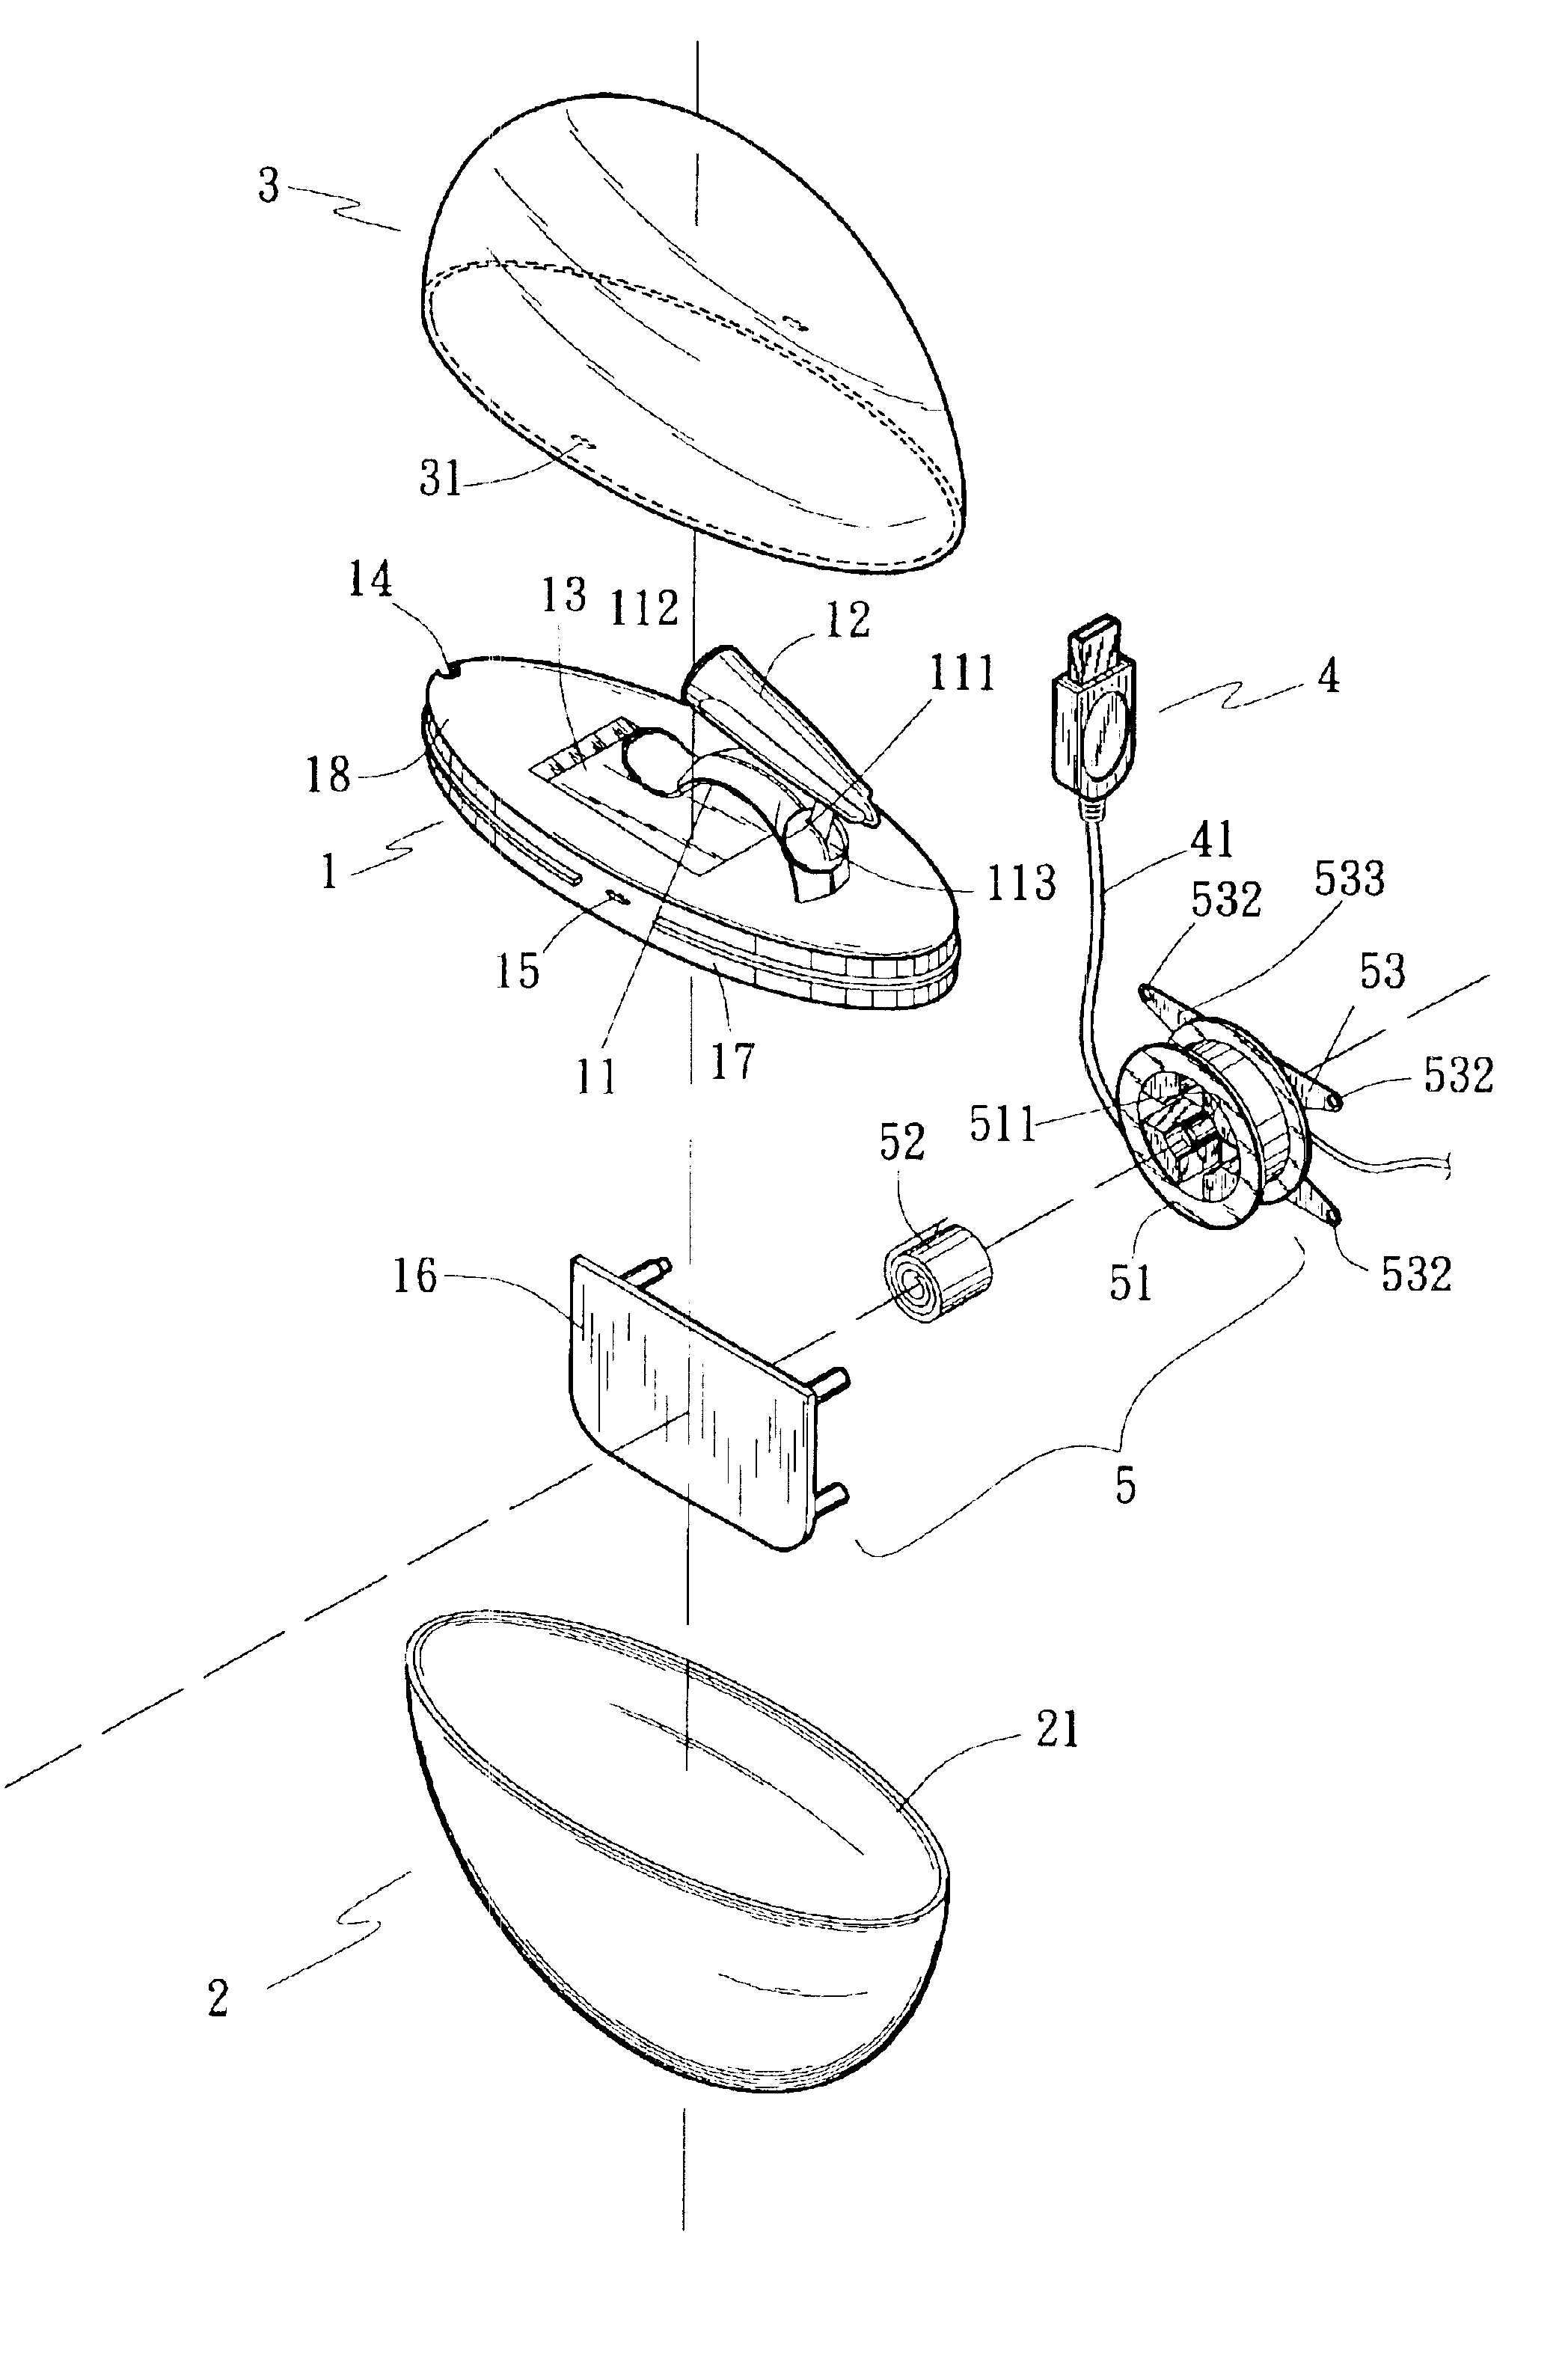 Computer light with extensible electric conductive wire